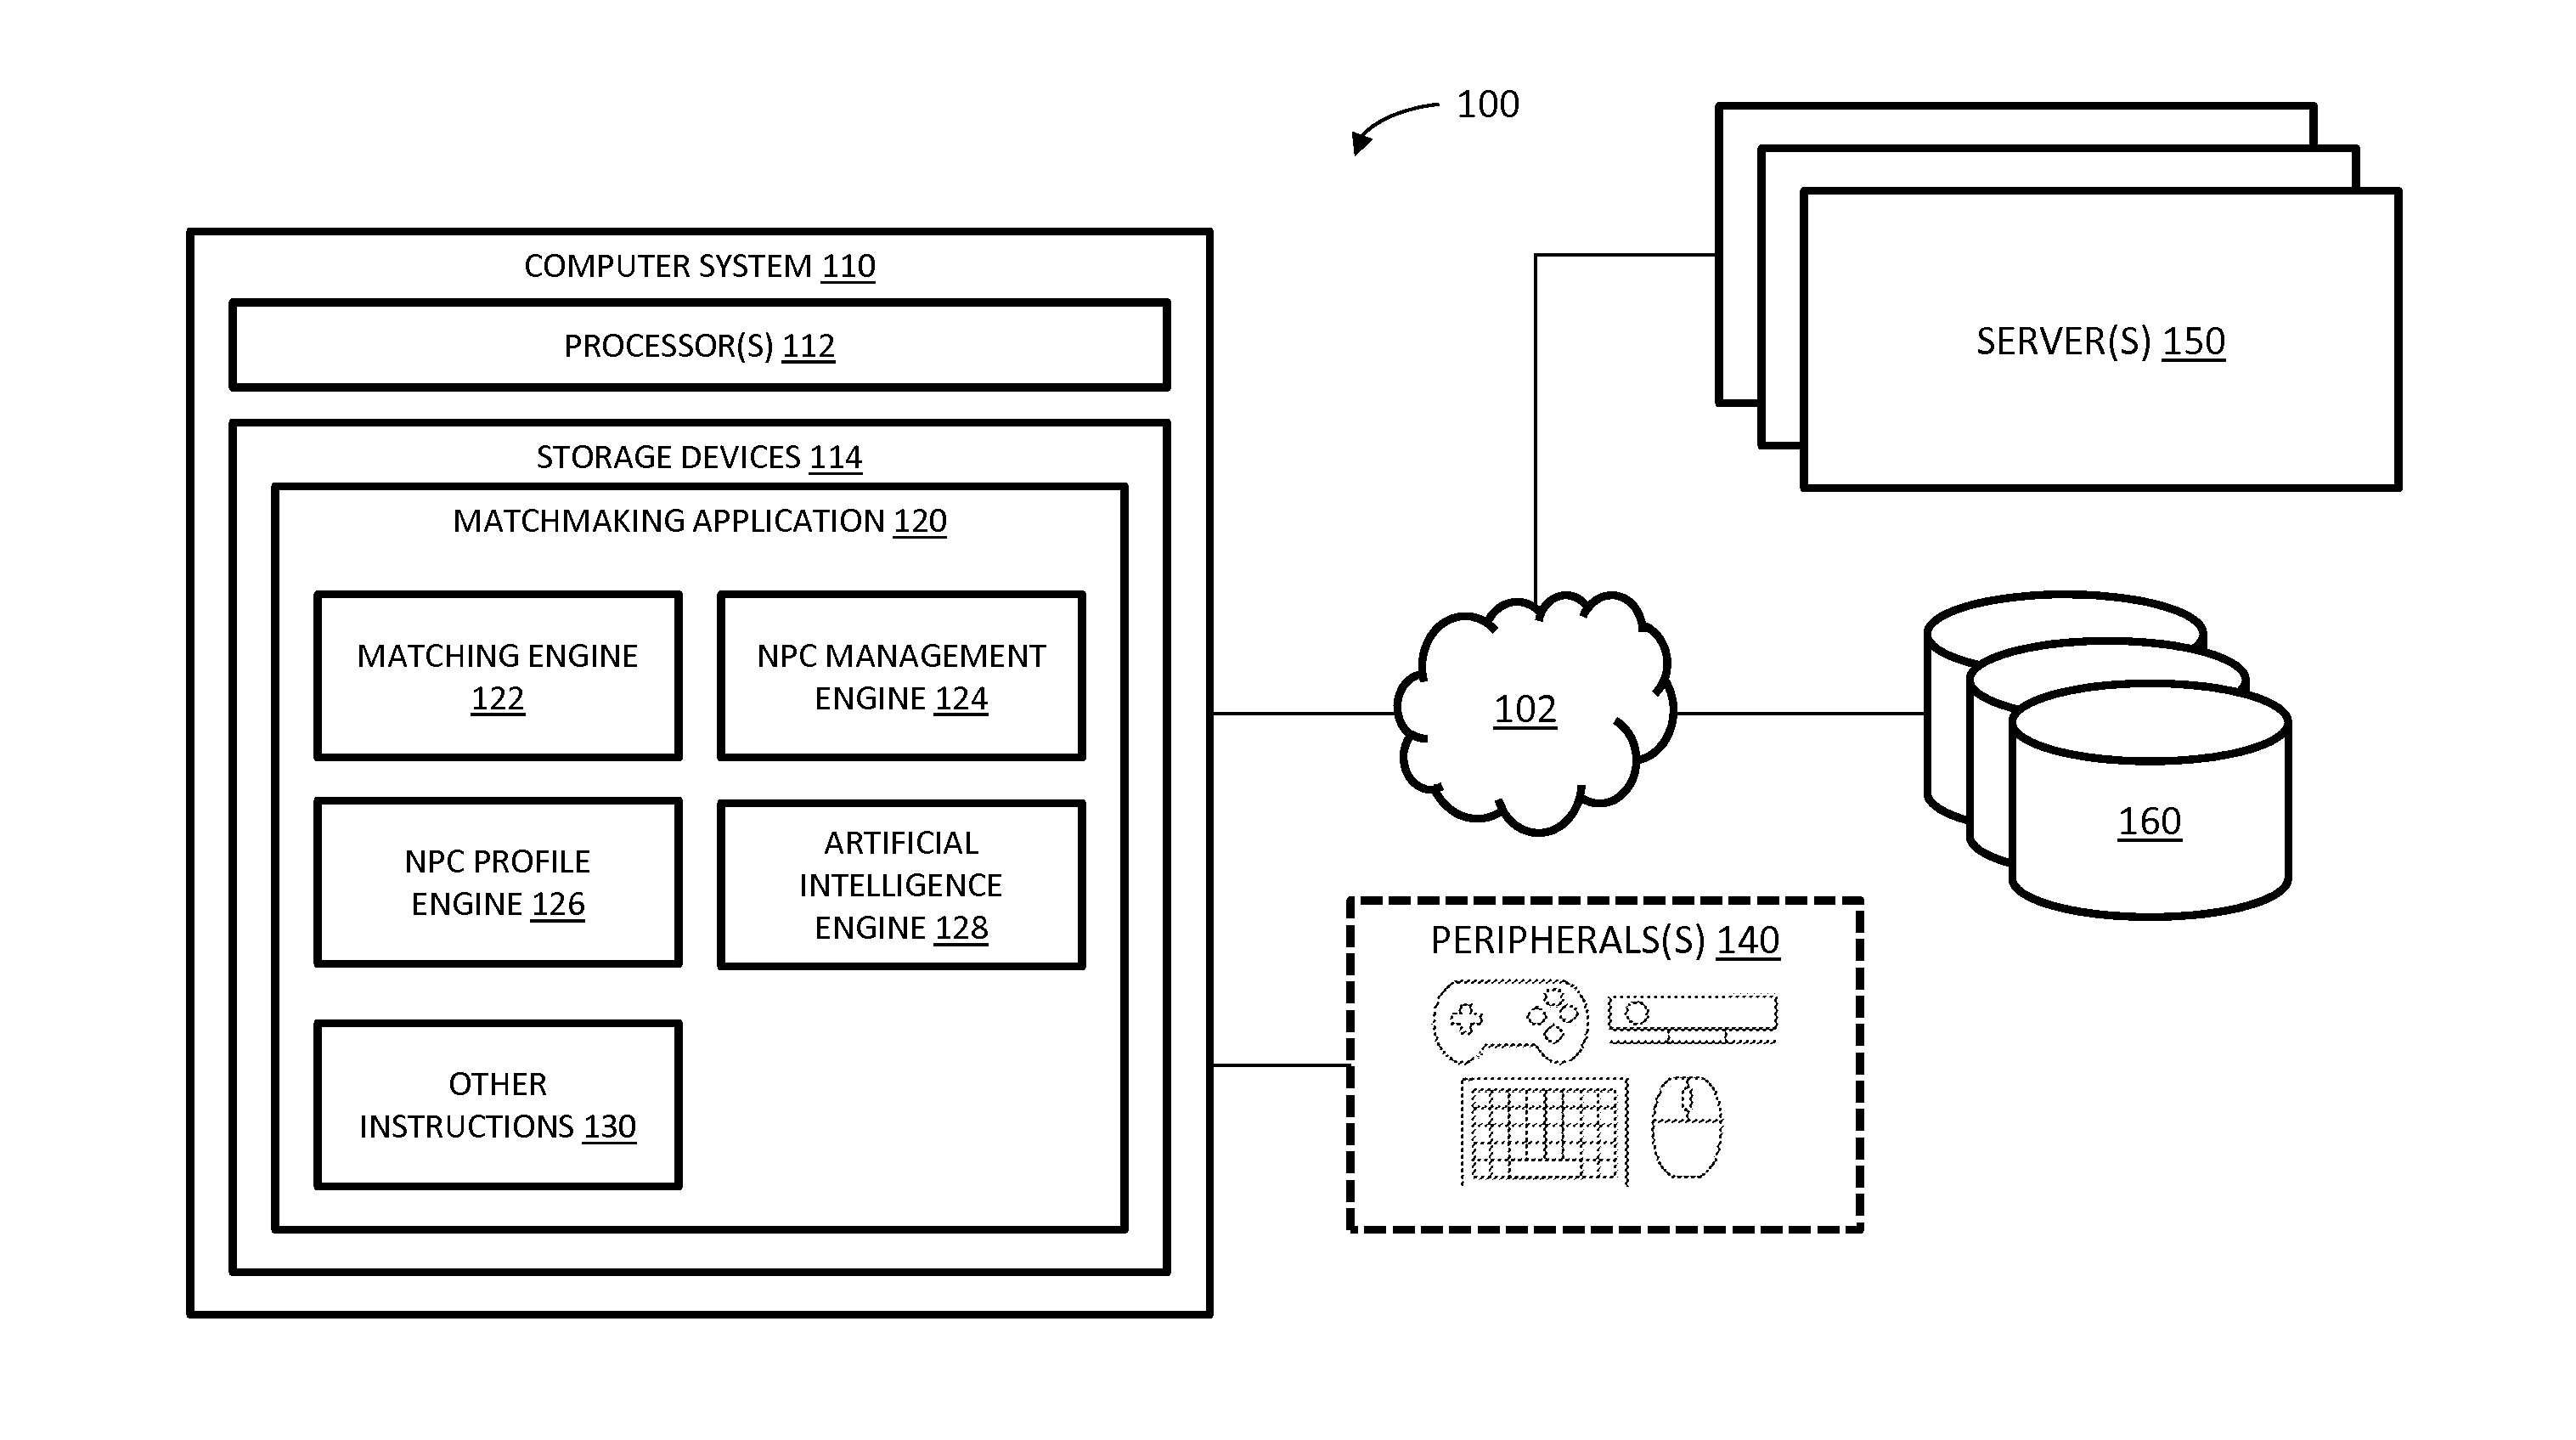 System and method for transparently styling non-player characters in a multiplayer video game